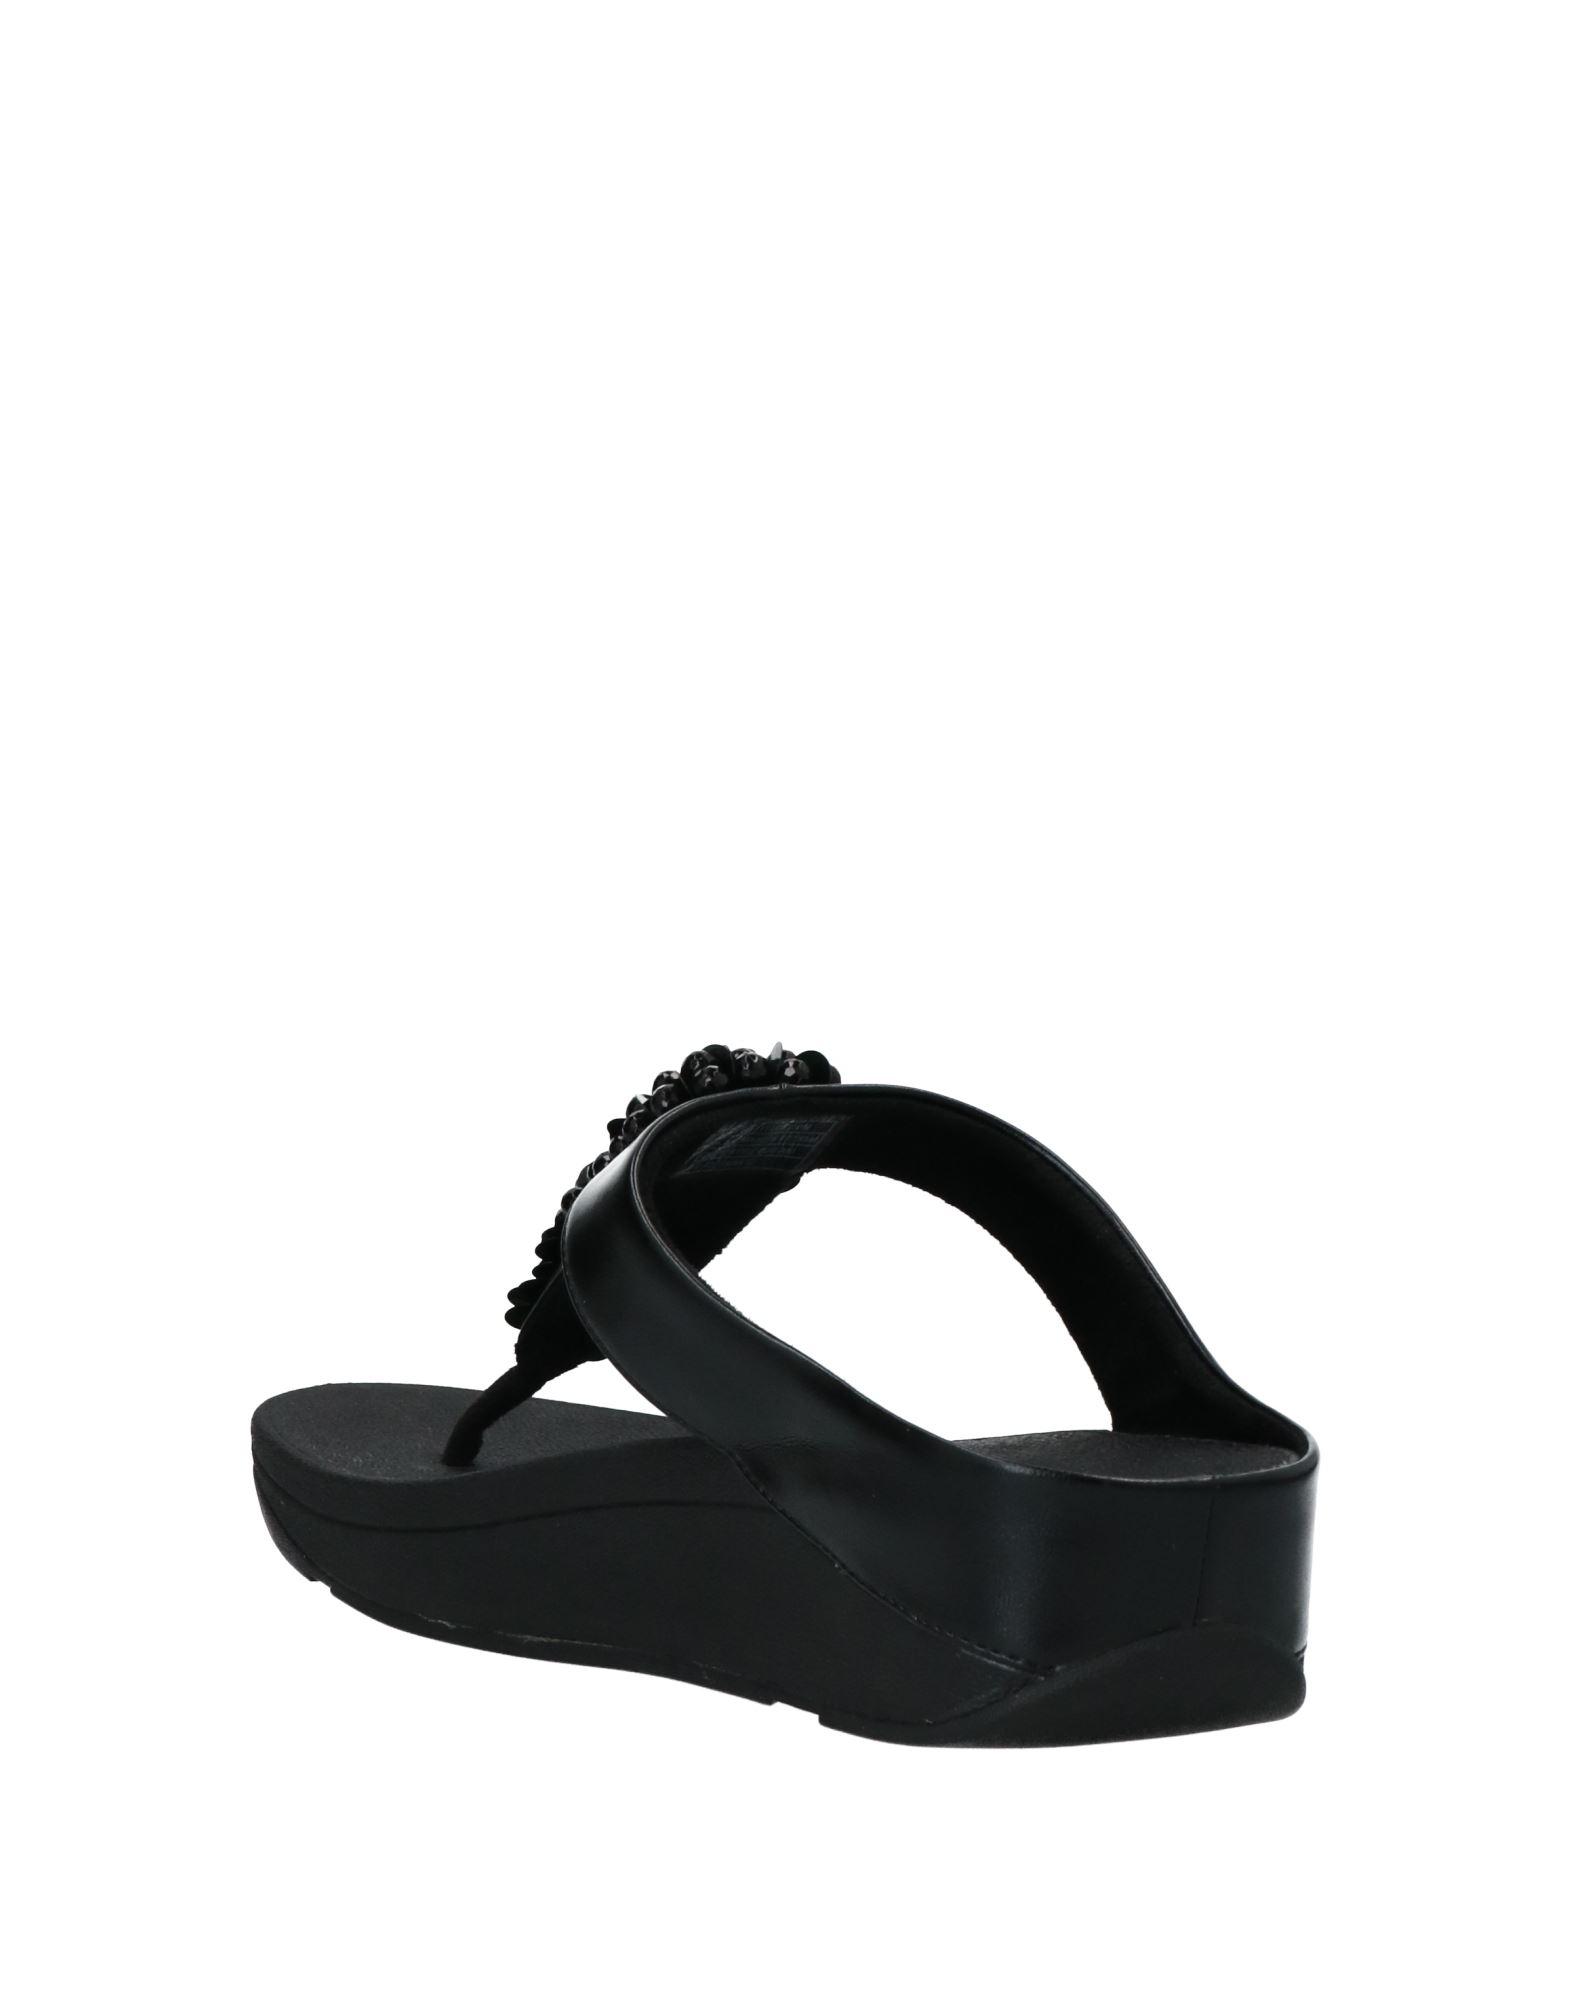 Fitflop Toe Post Sandals in Black | Lyst